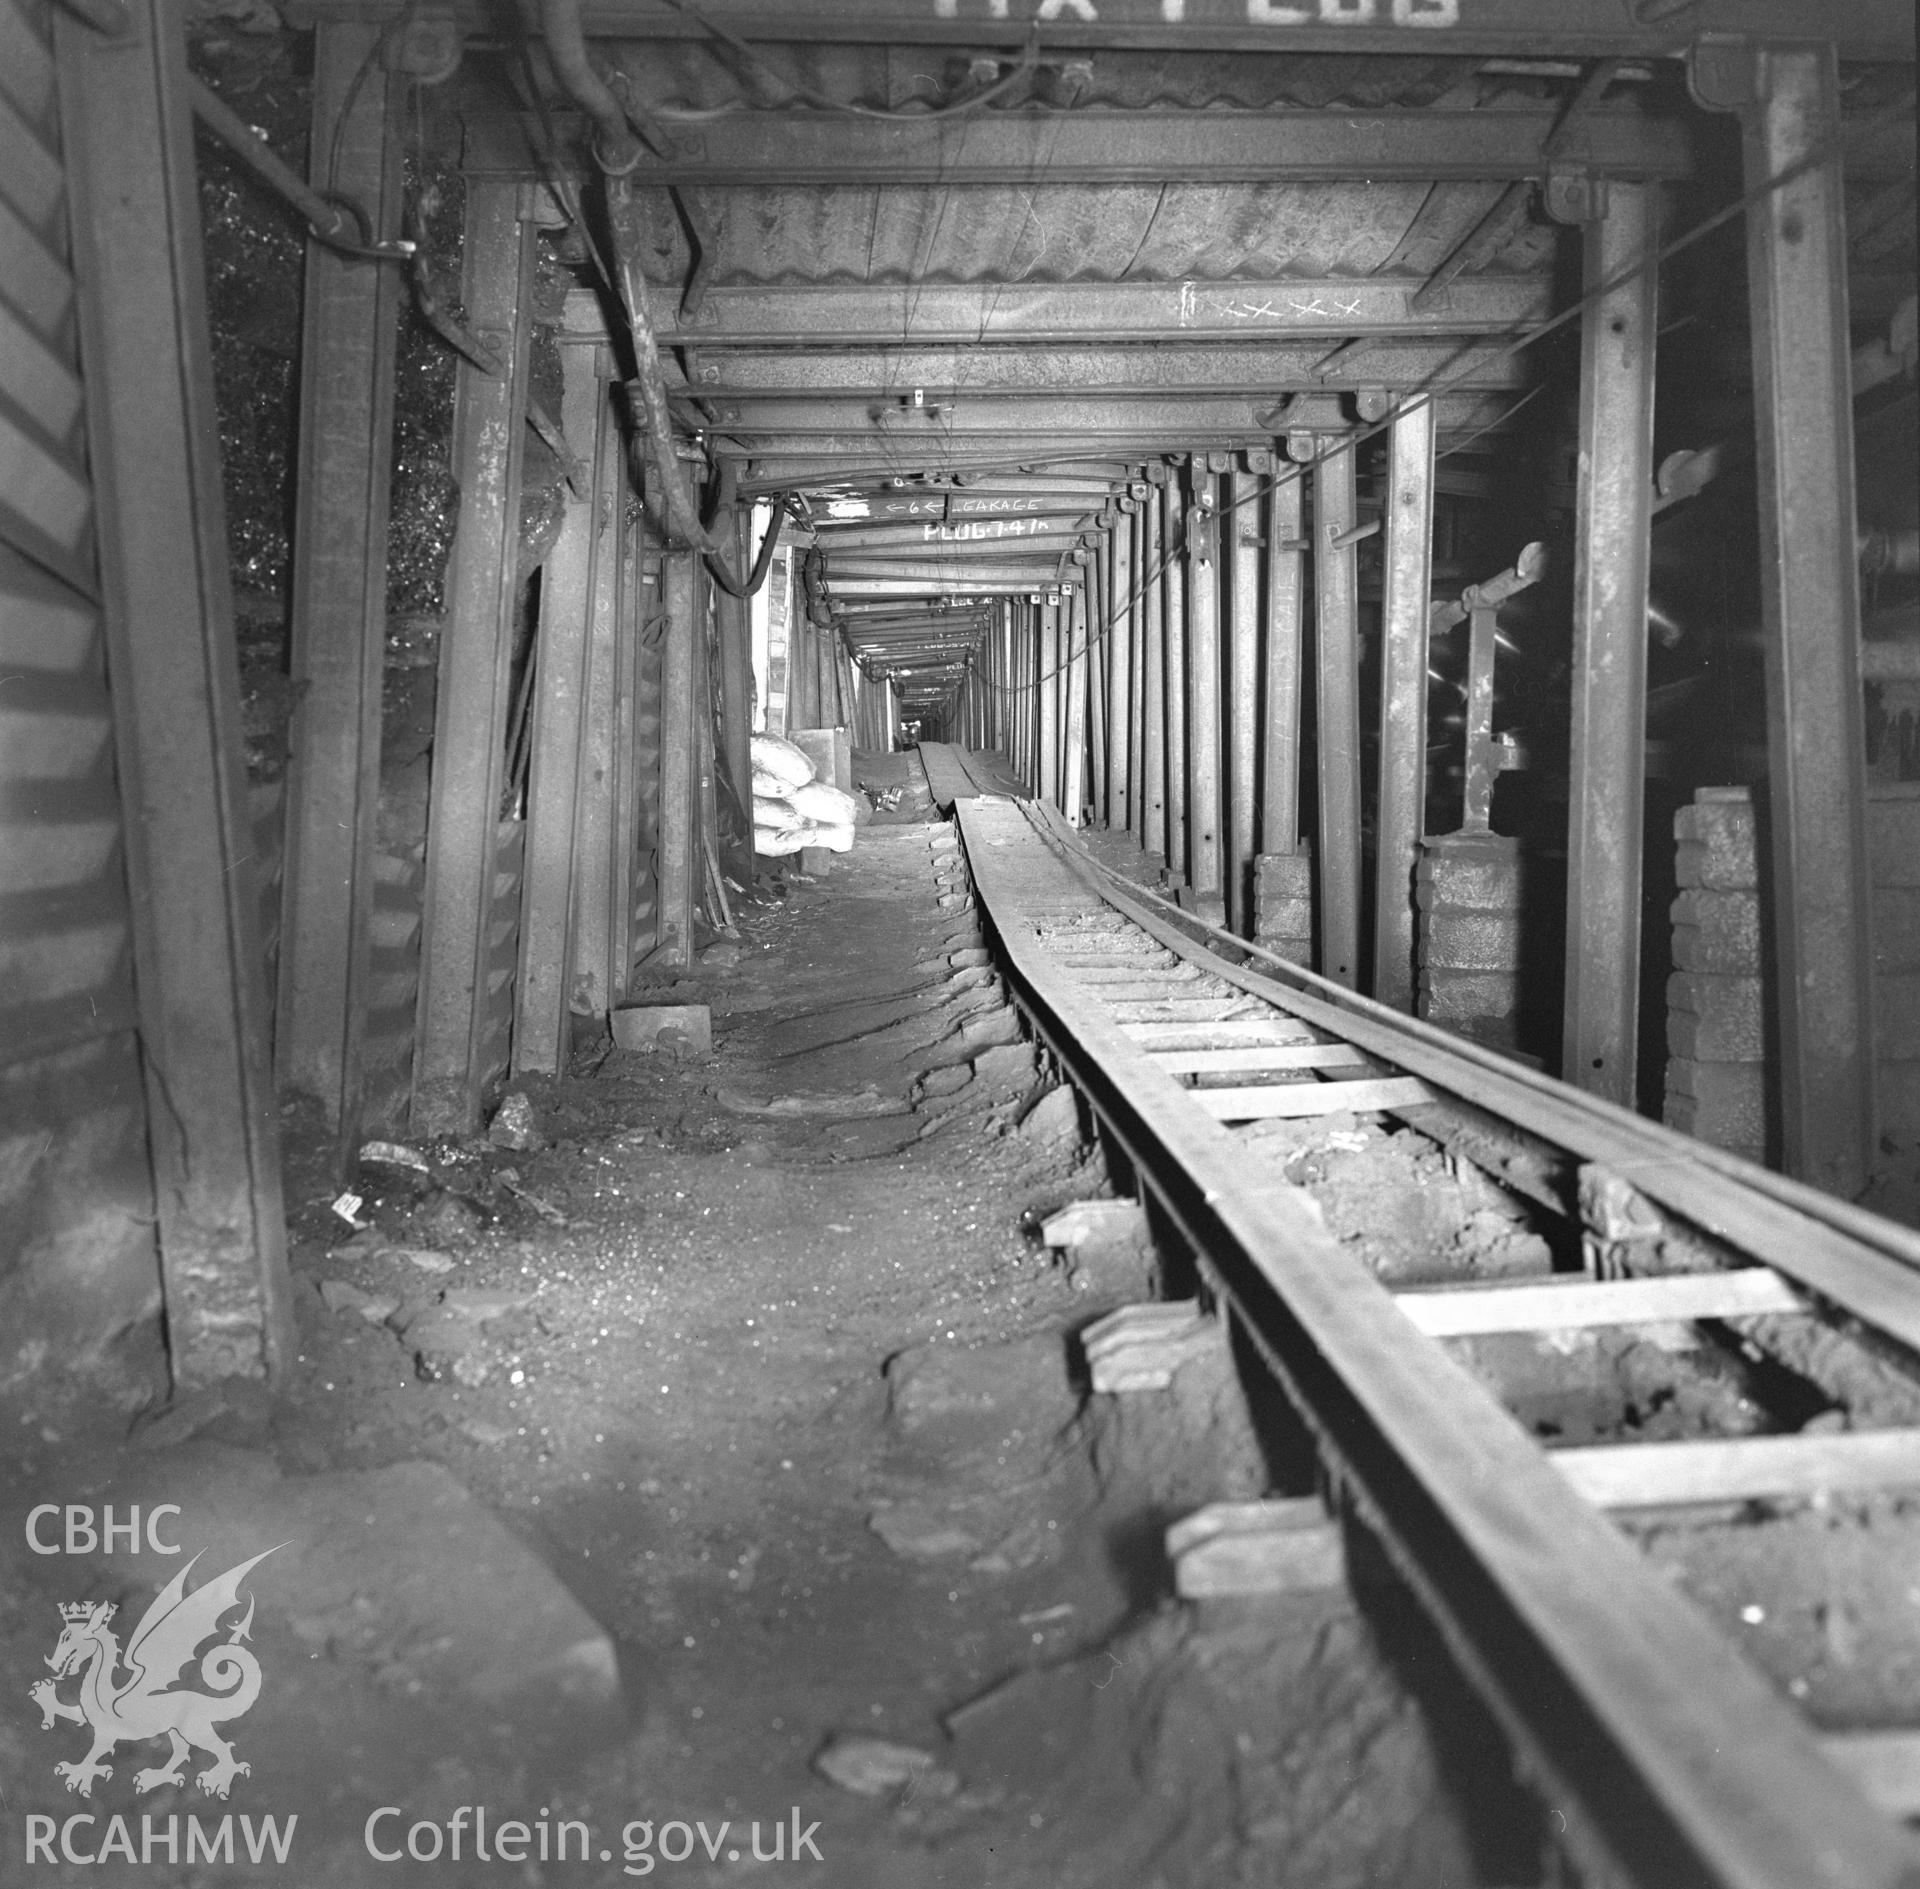 Digital copy of an acetate negative showing "square work in heading leading to above coal face" at Taff Colliery from the John Cornwell Collection.